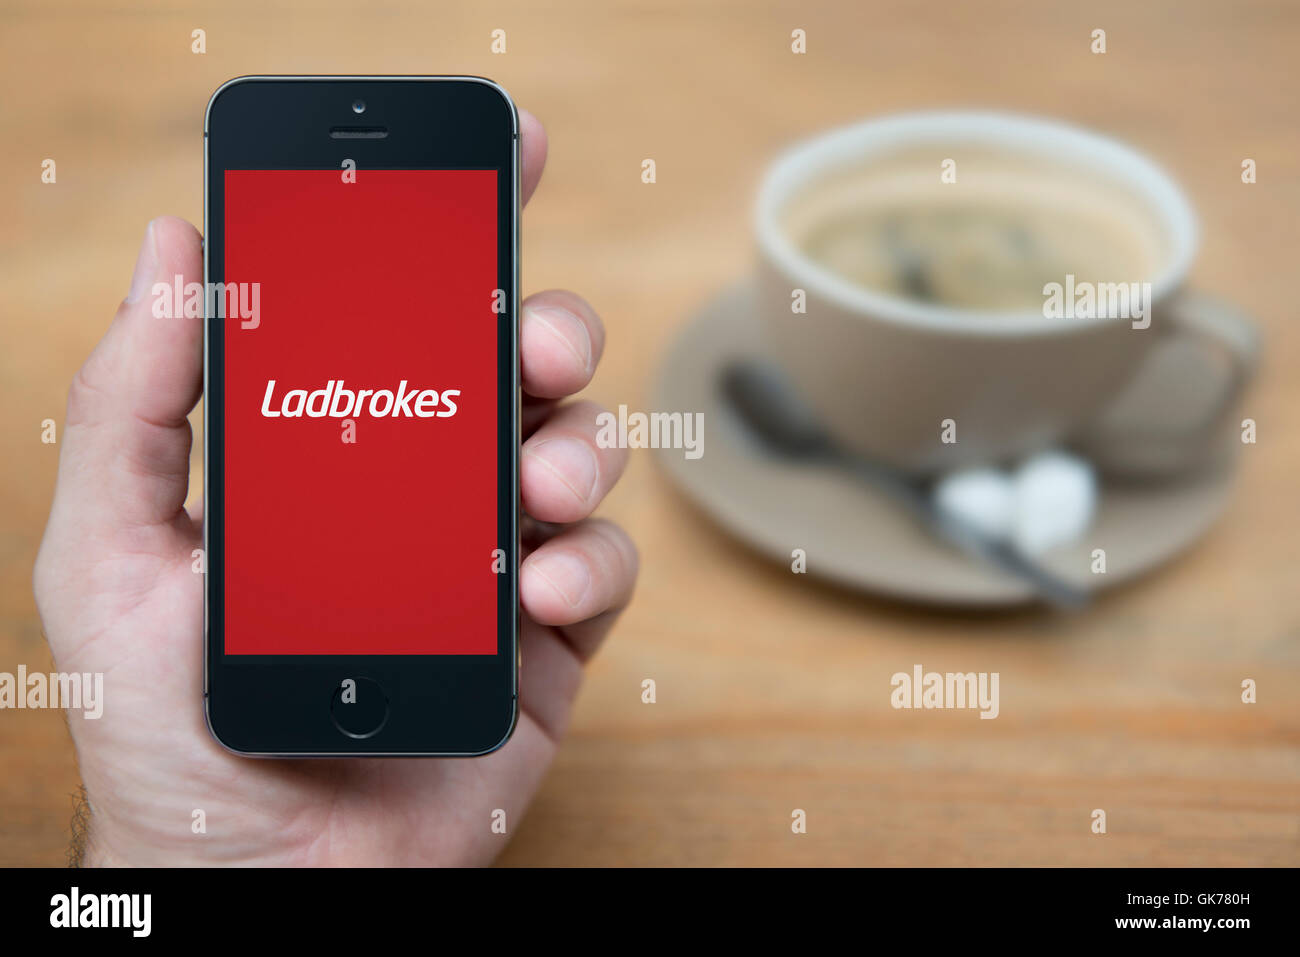 A man looks at his iPhone which displays the Ladbrokes logo, while sat with a cup of coffee (Editorial use only). Stock Photo